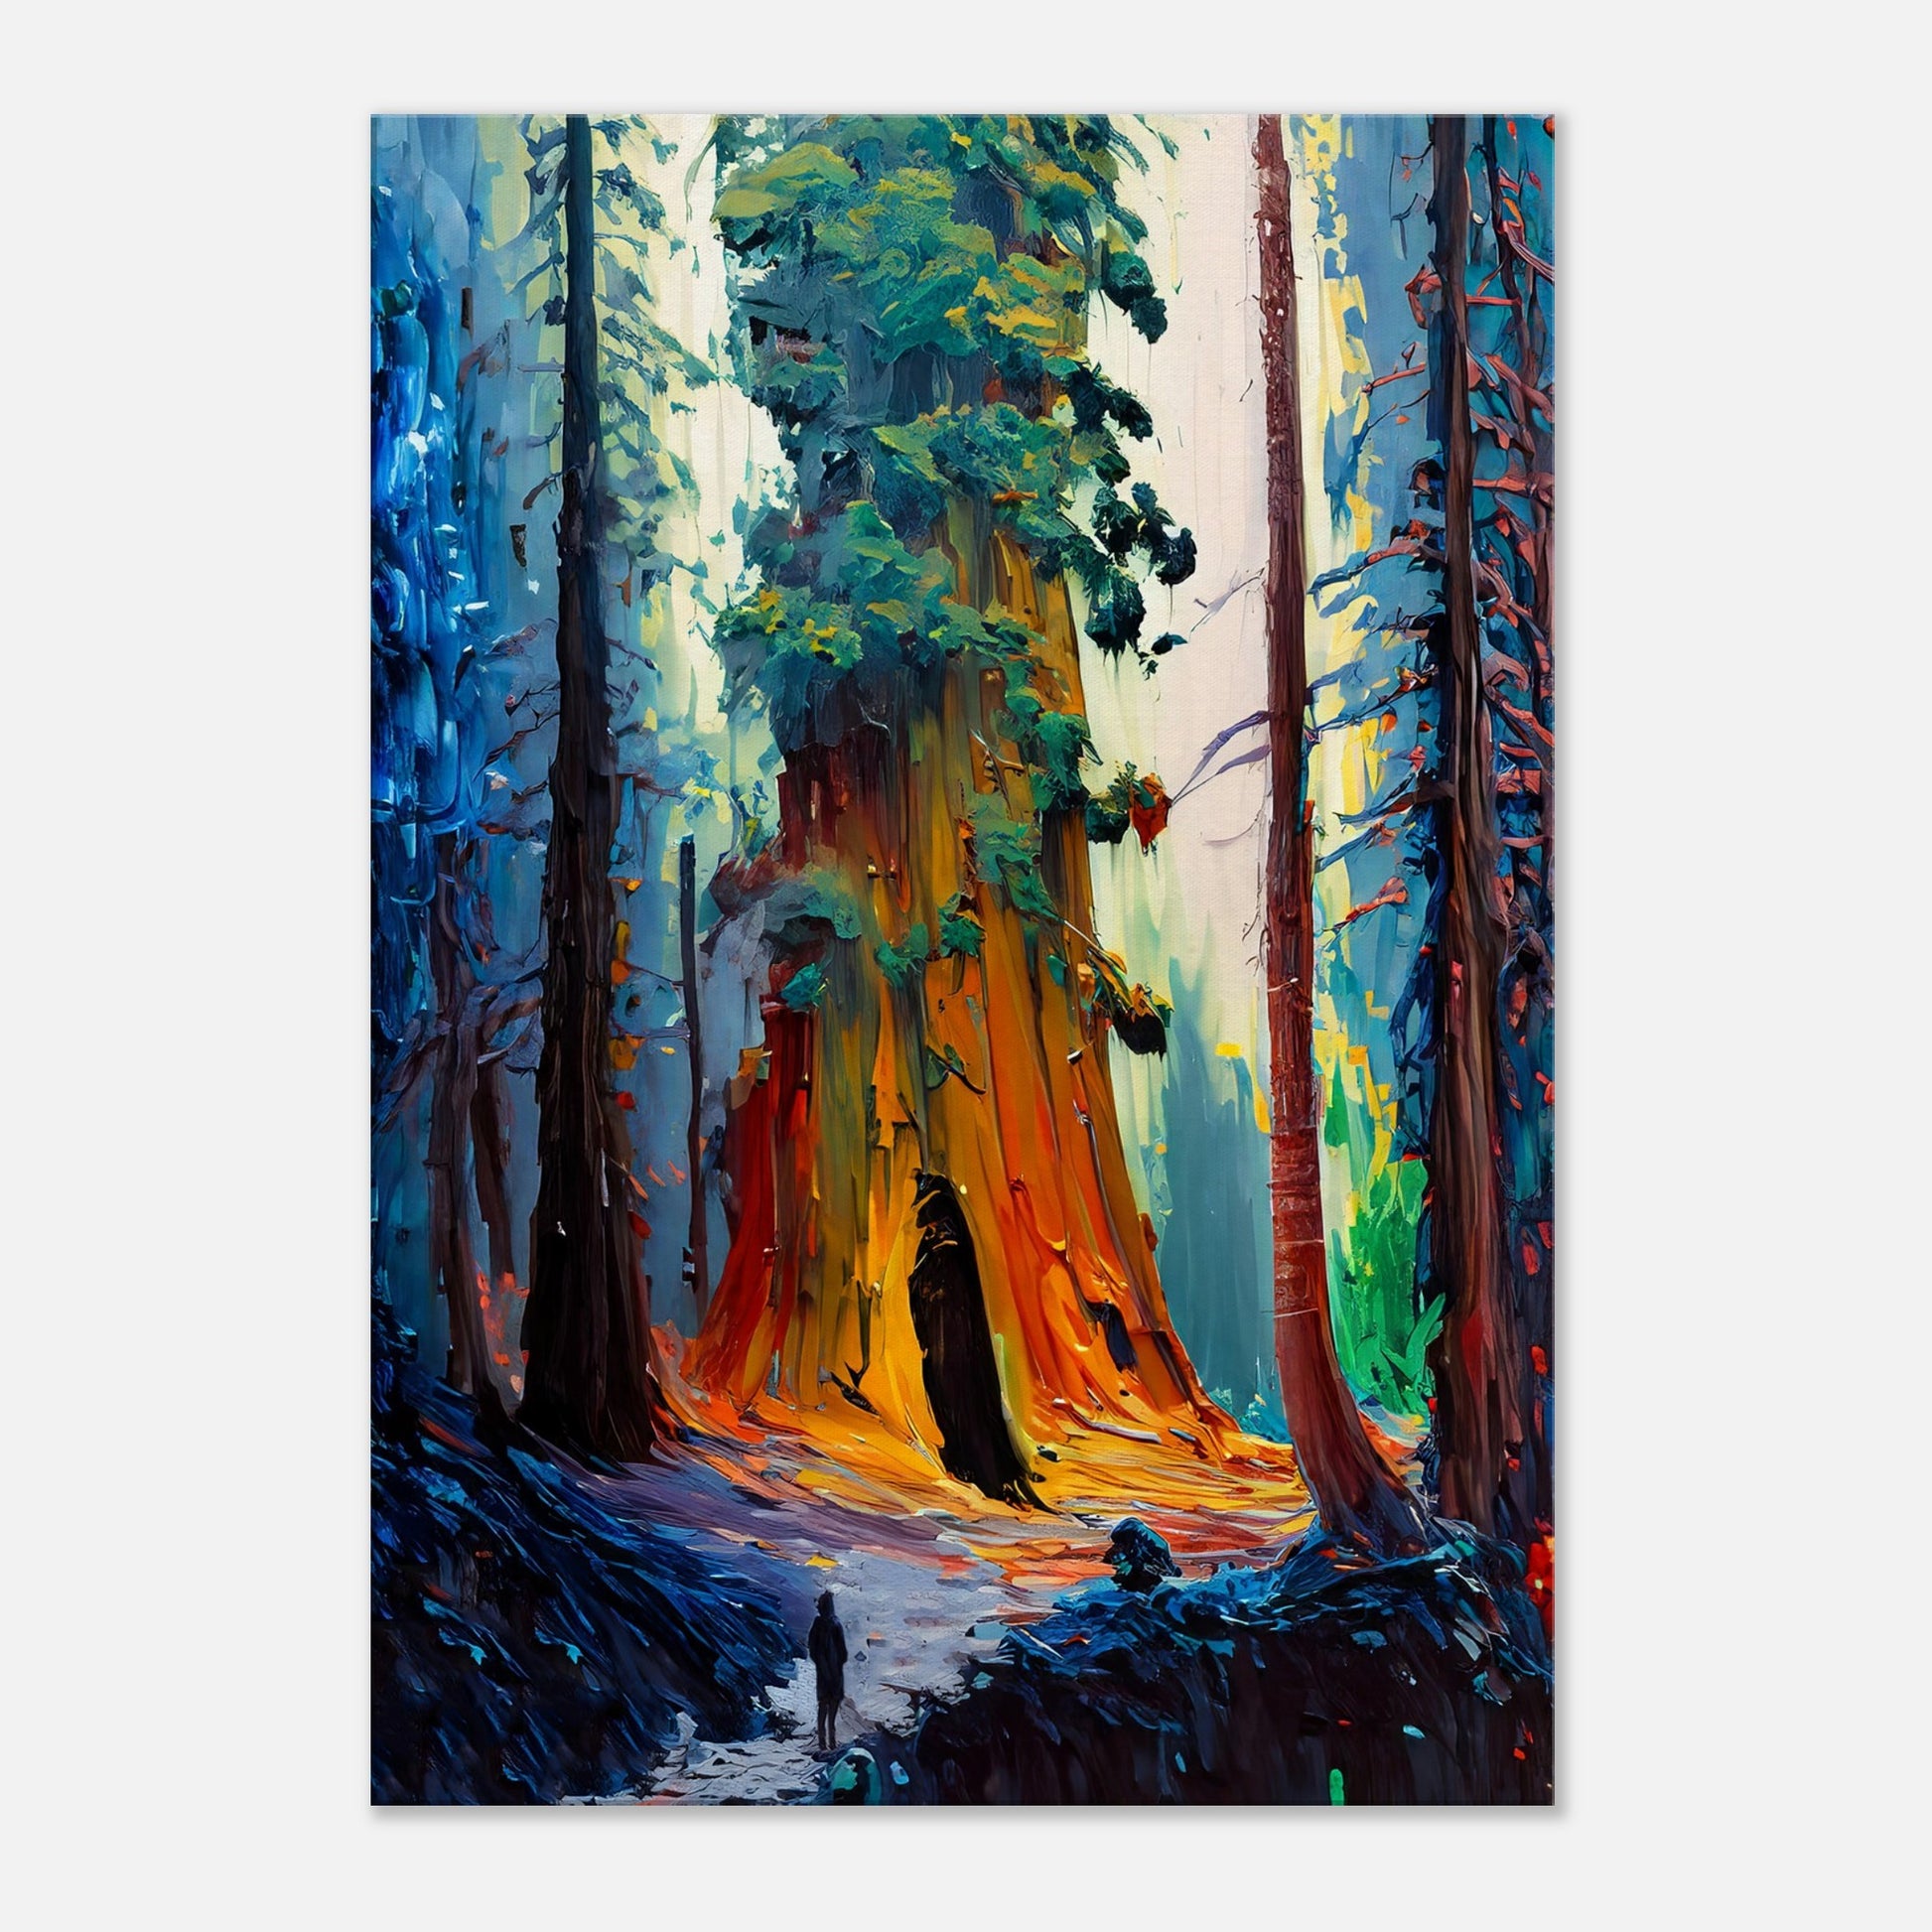 Canvas Print Sequoia forest Abstract art by Posterify Design - Posterify